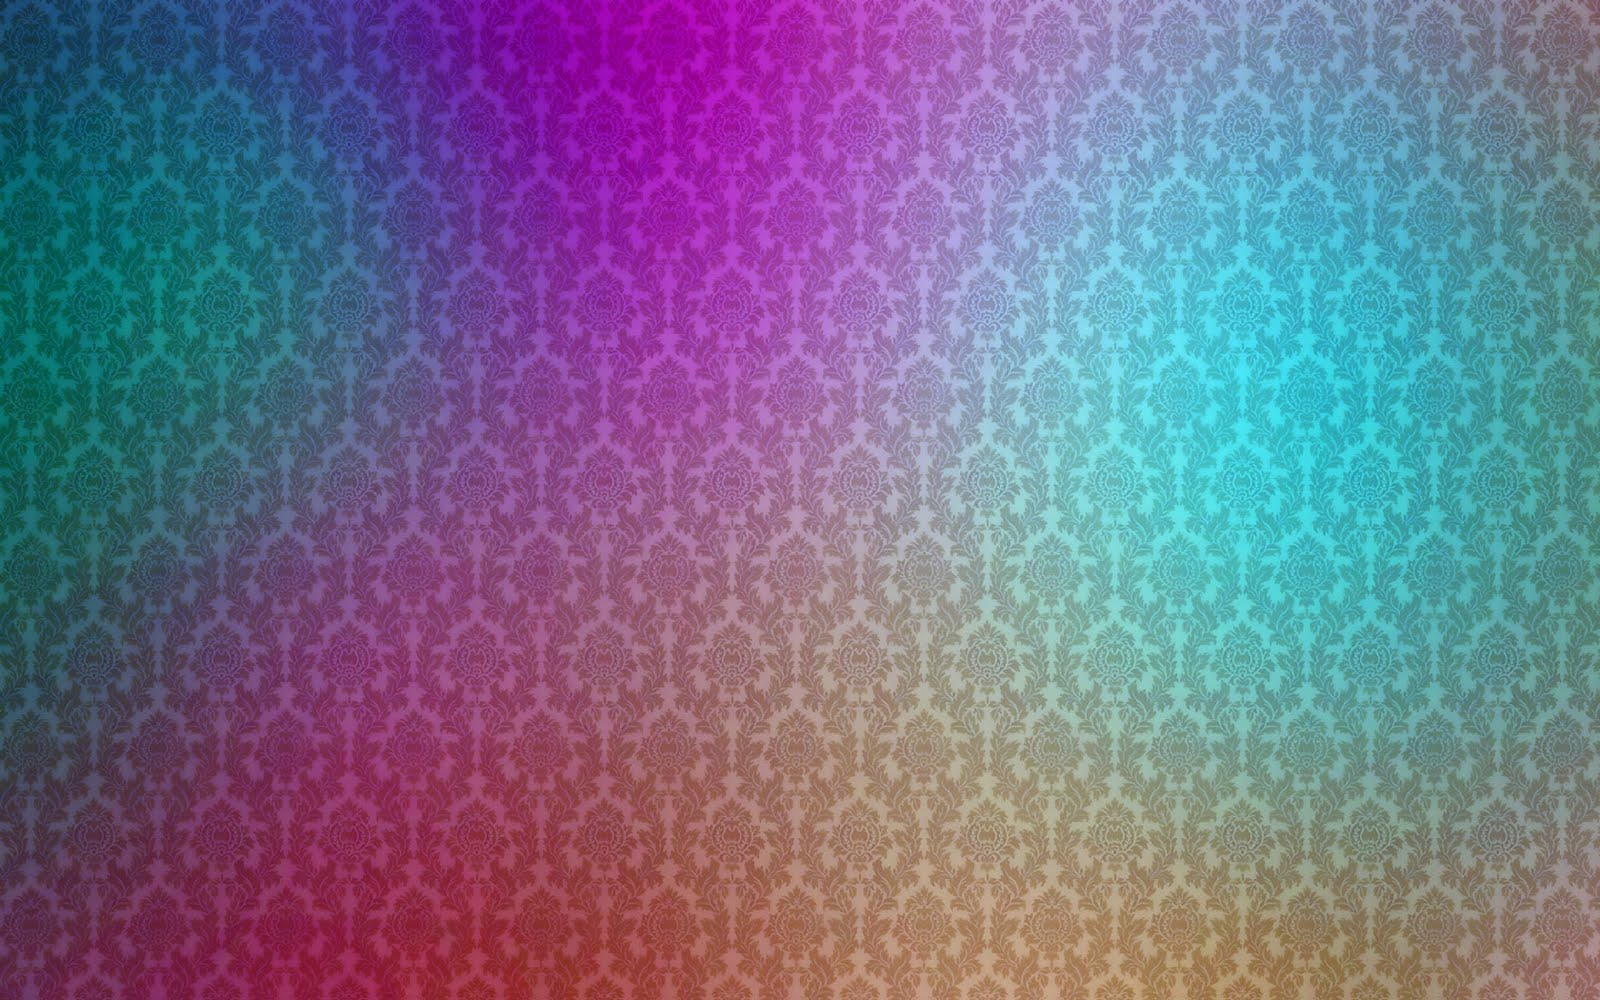 Blue and pink colors on a pattern  backgrounds